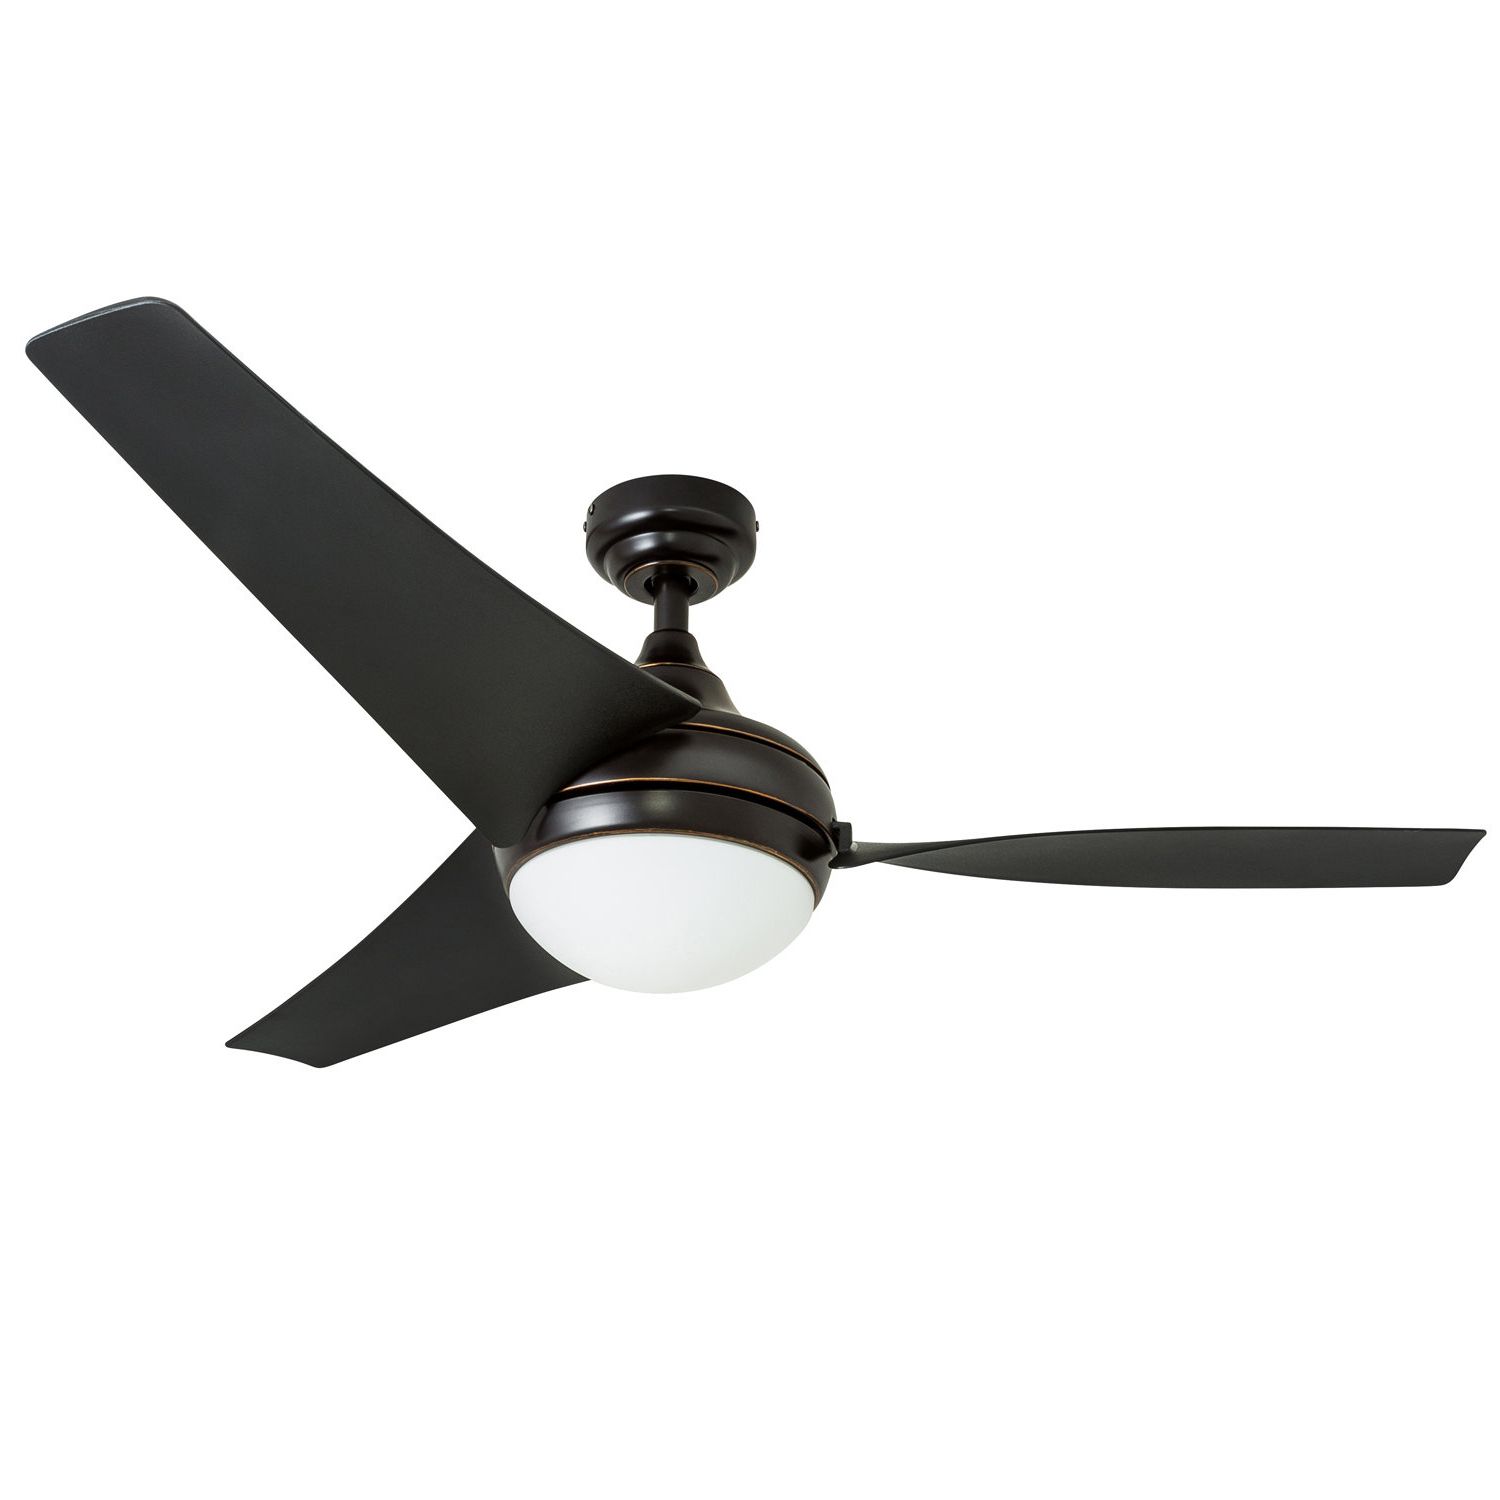 Alyce 3 Blade Led Ceiling Fans With Remote Control Within Widely Used 52" Schall 3 Blade Led Ceiling Fan With Remote (View 10 of 20)